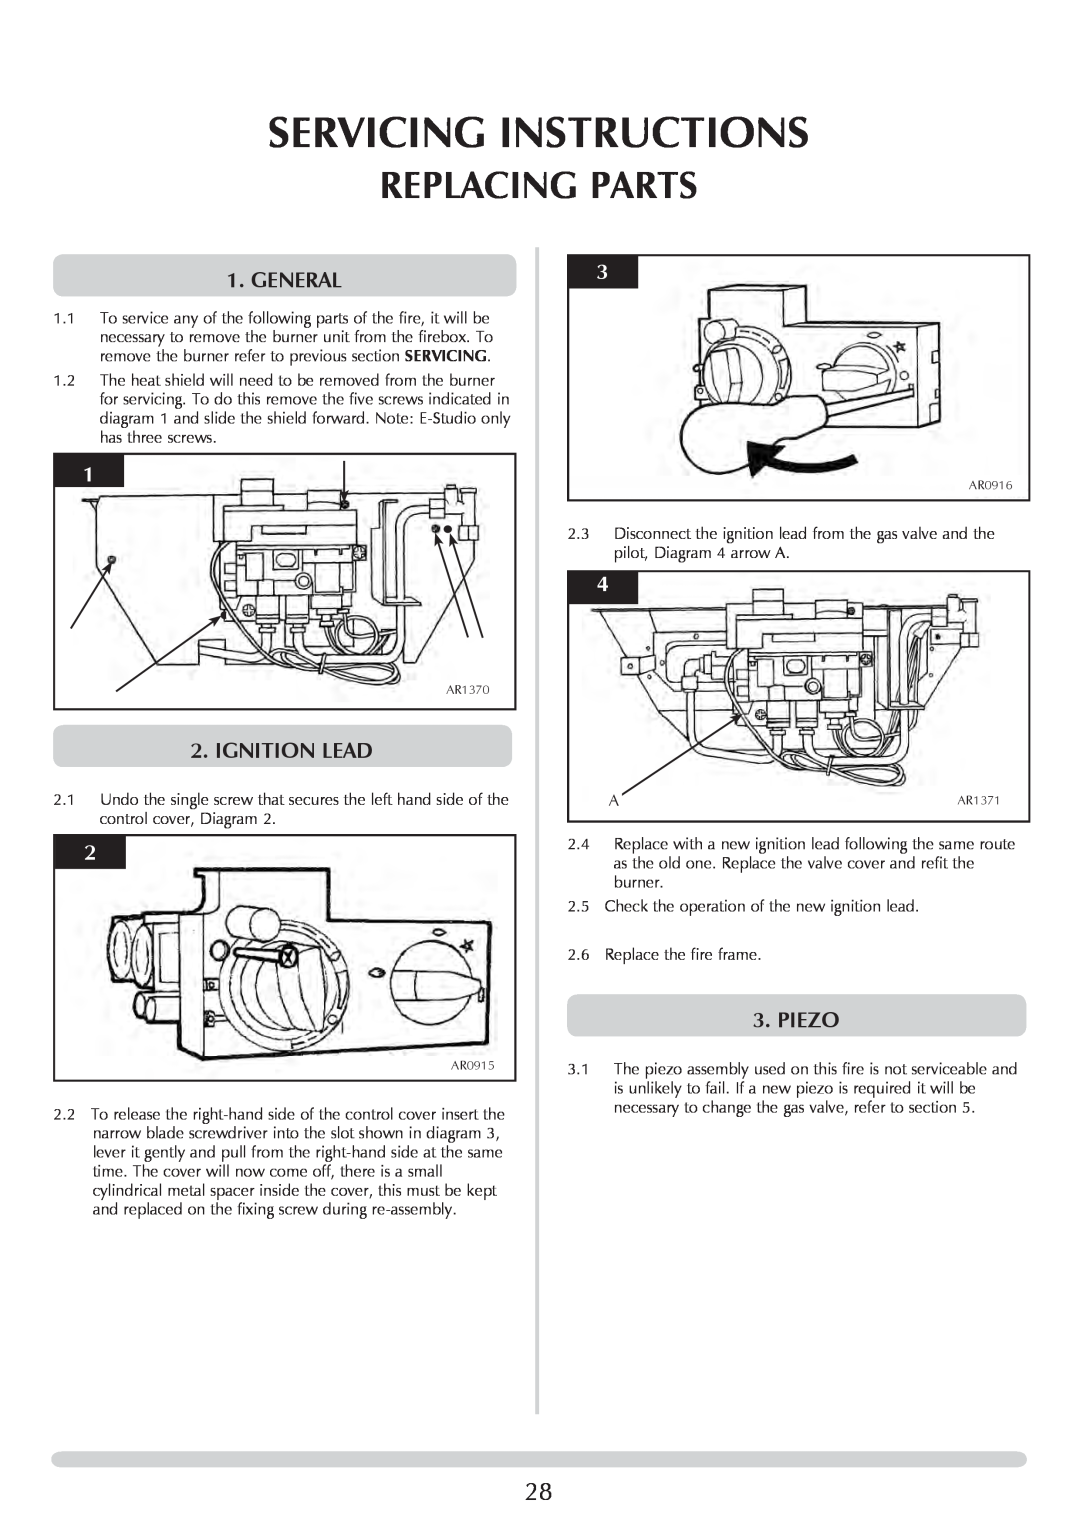 Stovax PR0741 manual Replacing Parts, Servicing Instructions, General, Ignition Lead, piezo 